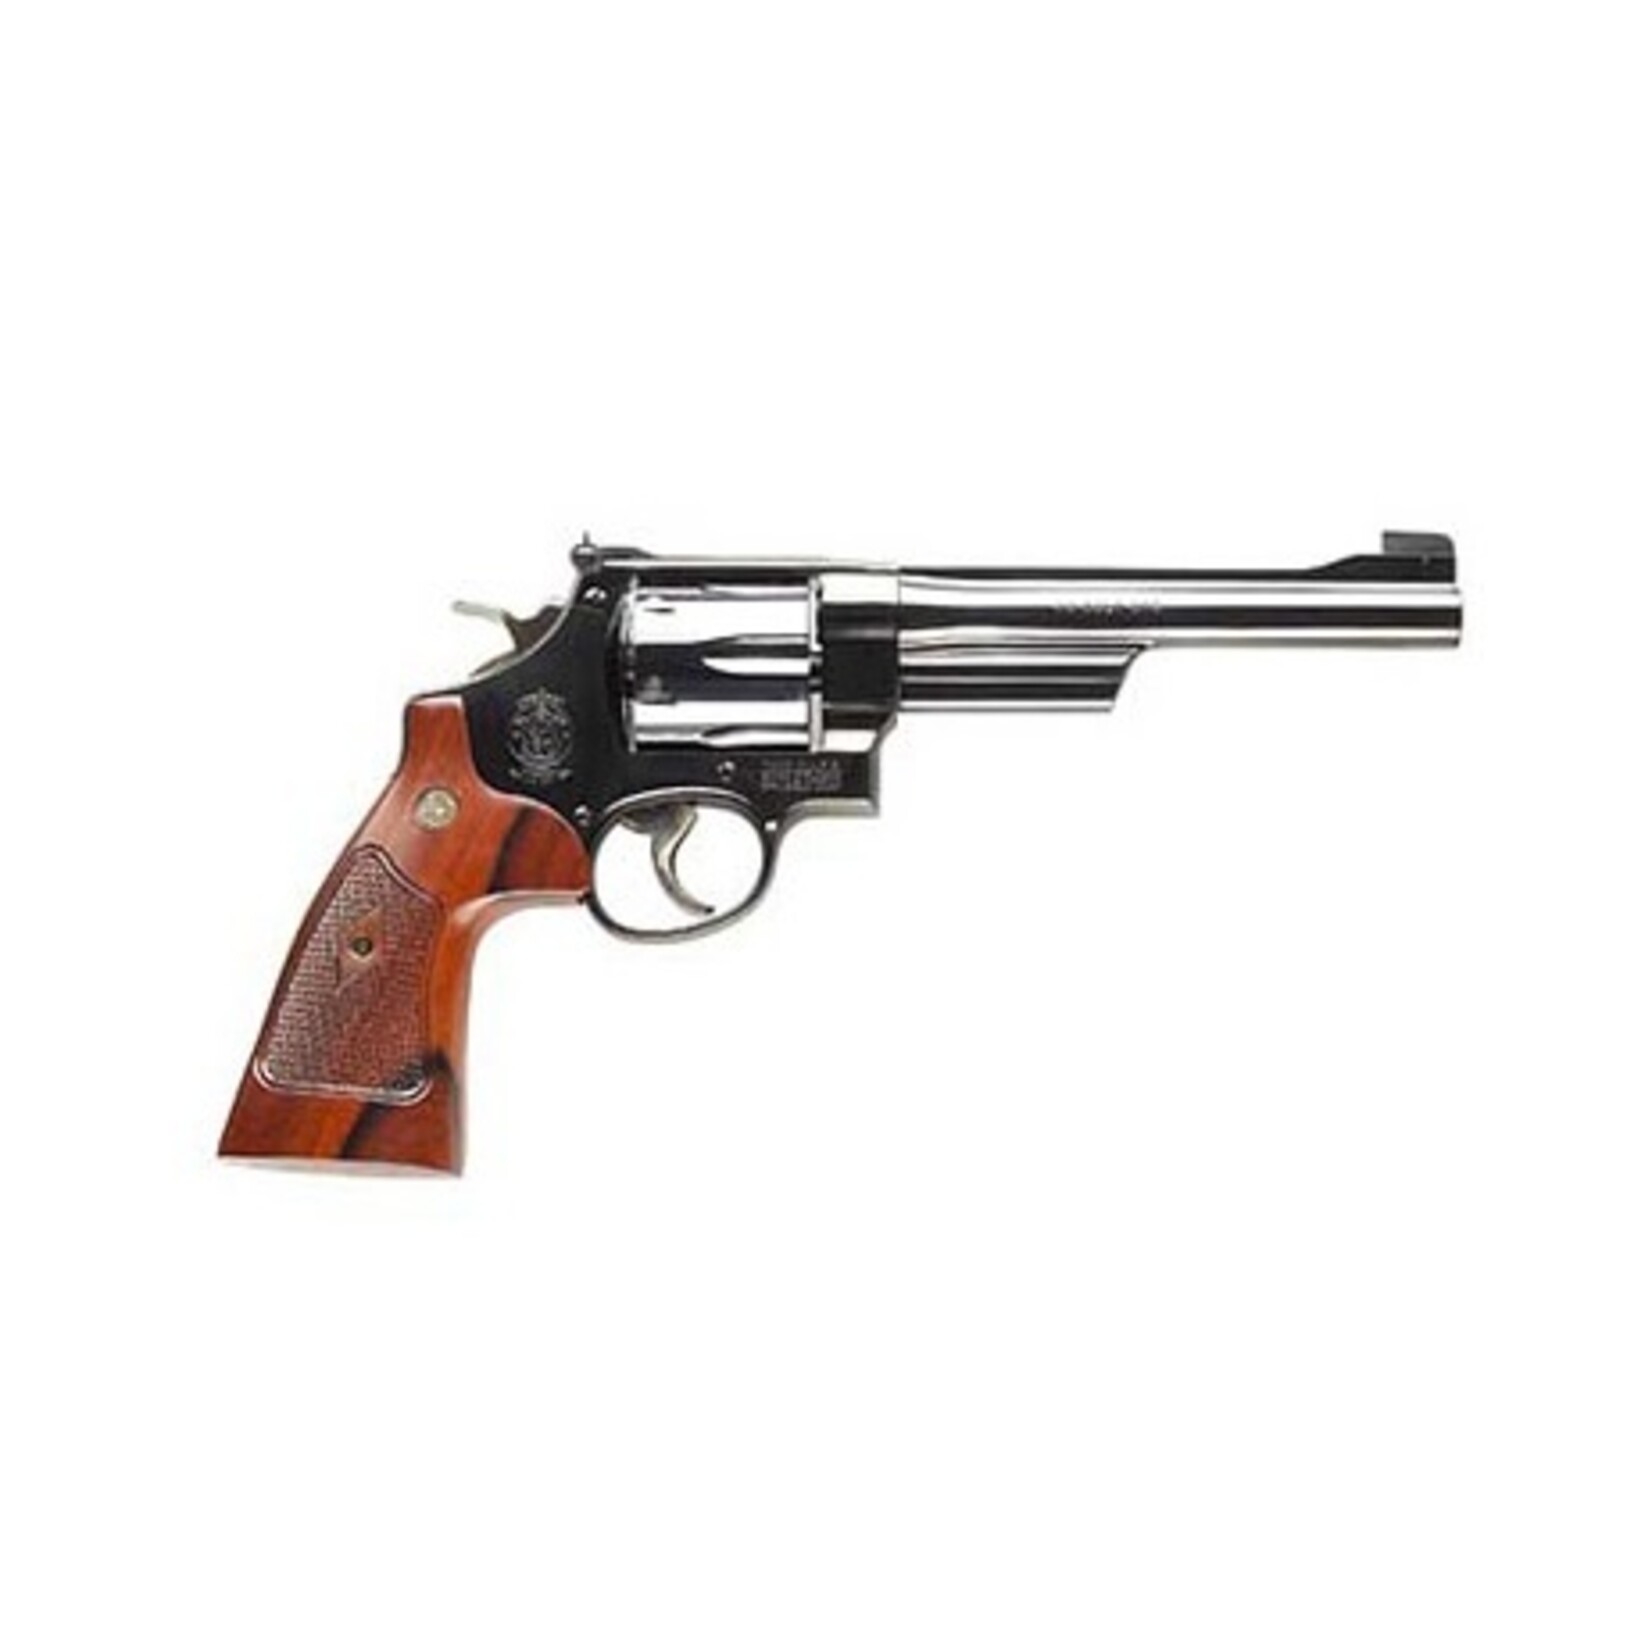 SMITH & WESSON S&W MODEL 25, 45 LC, 6.5"BBL, WOOD GRIP, 6 ROUNDS